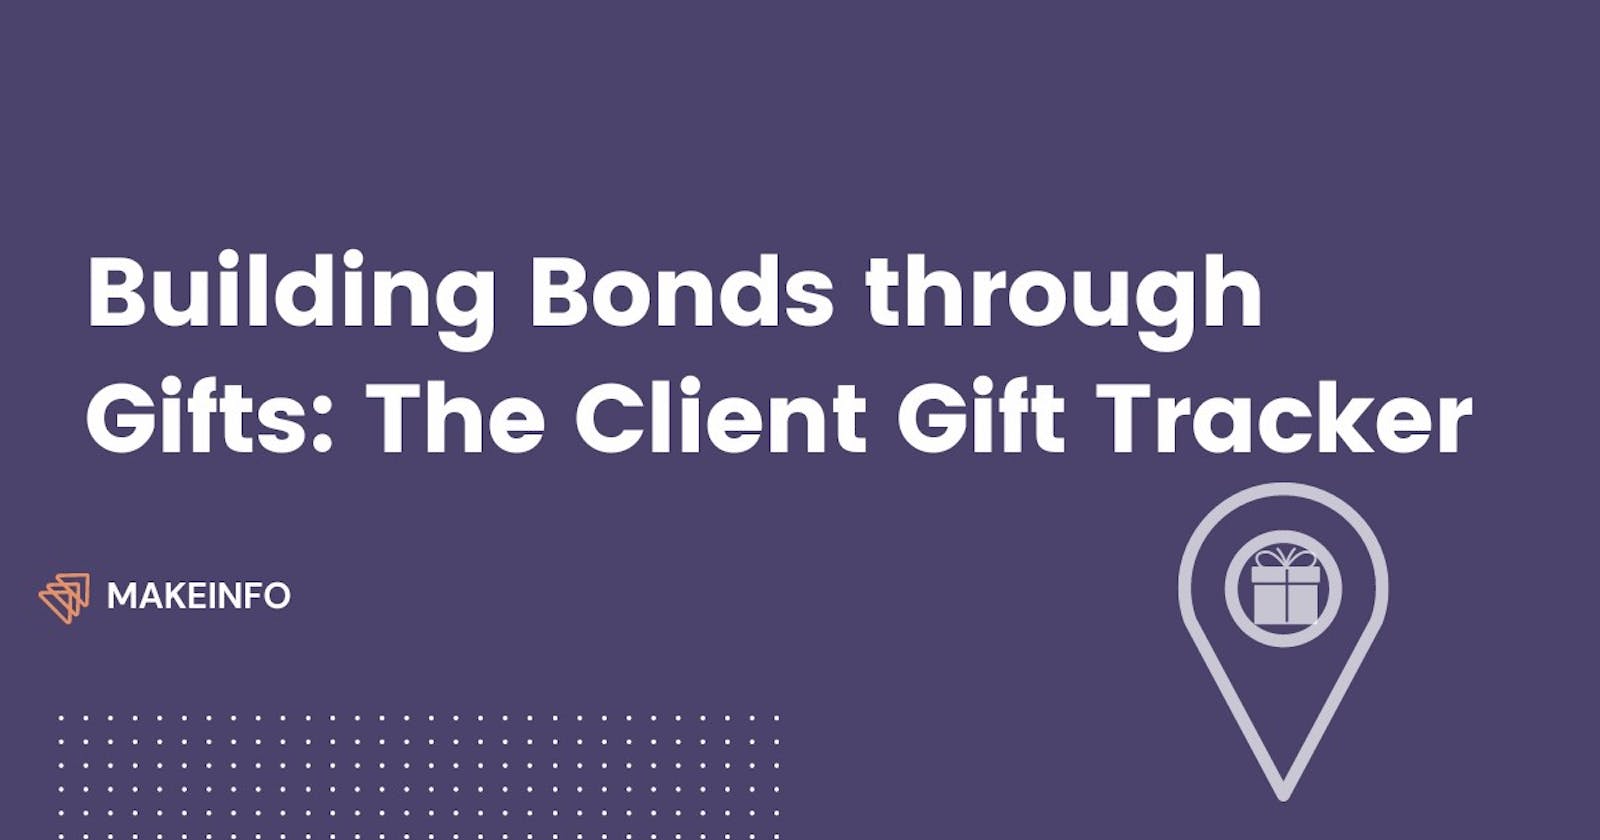 Building Bonds through Gifts: The Client Gift Tracker